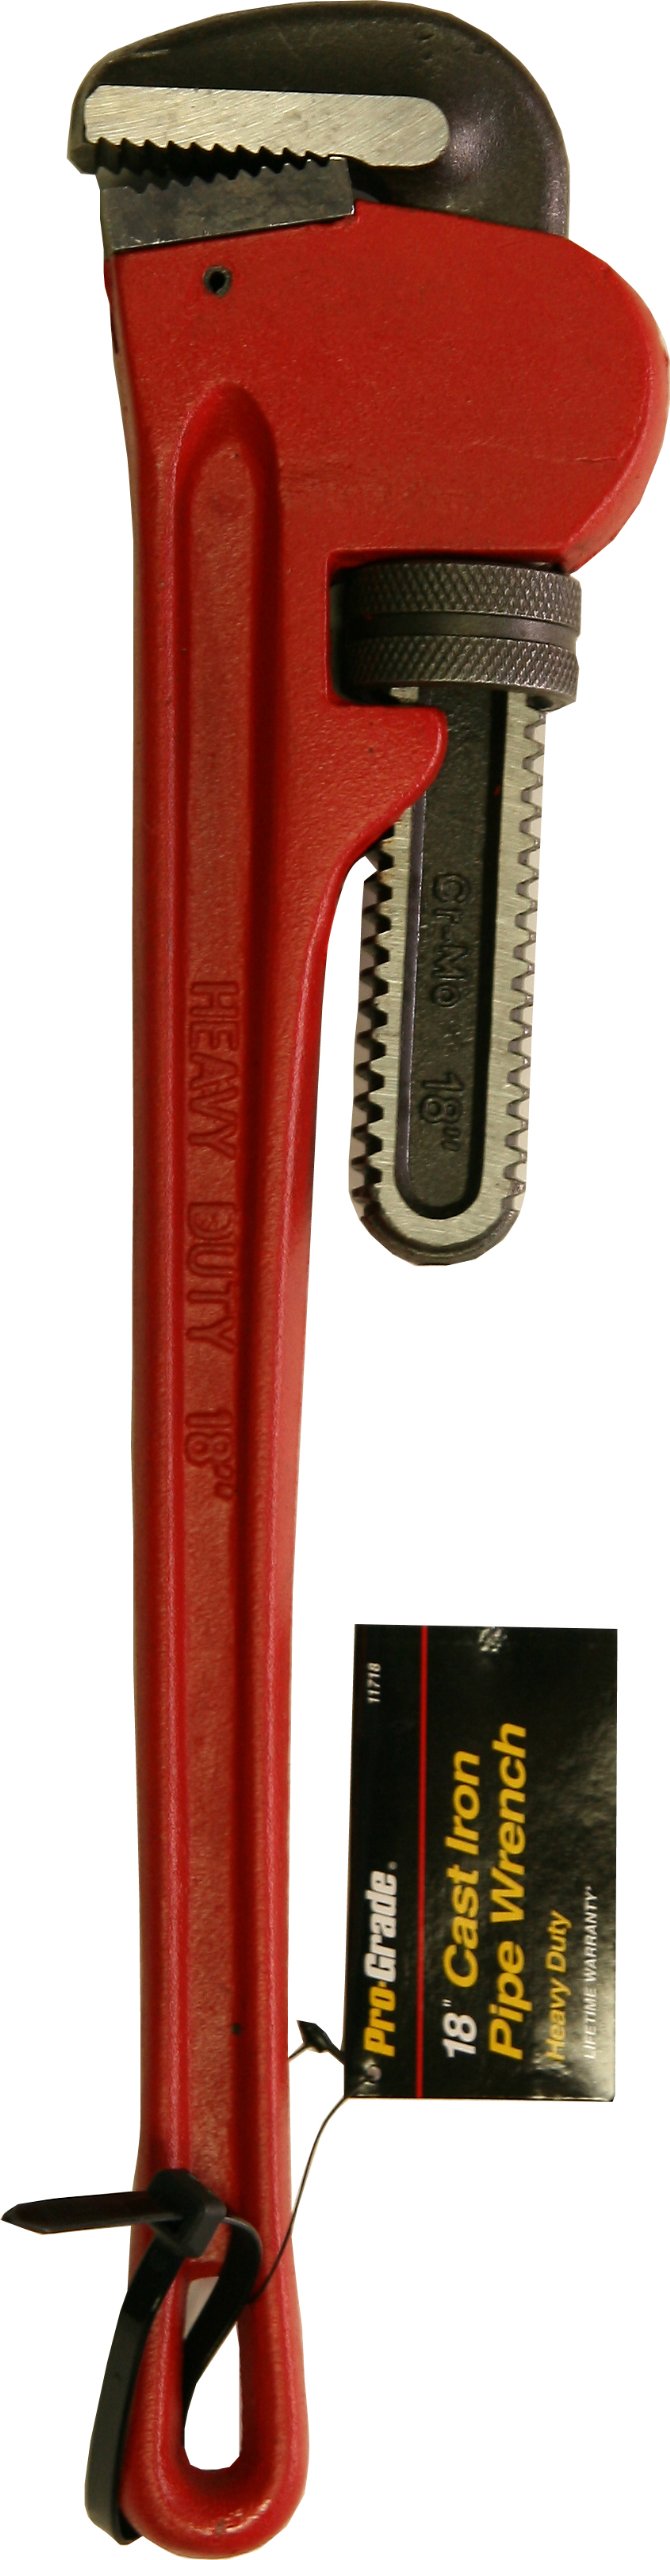 Pro-Grade 11719 18 in. Heavy Duty Offset Aluminum Pipe Wrench